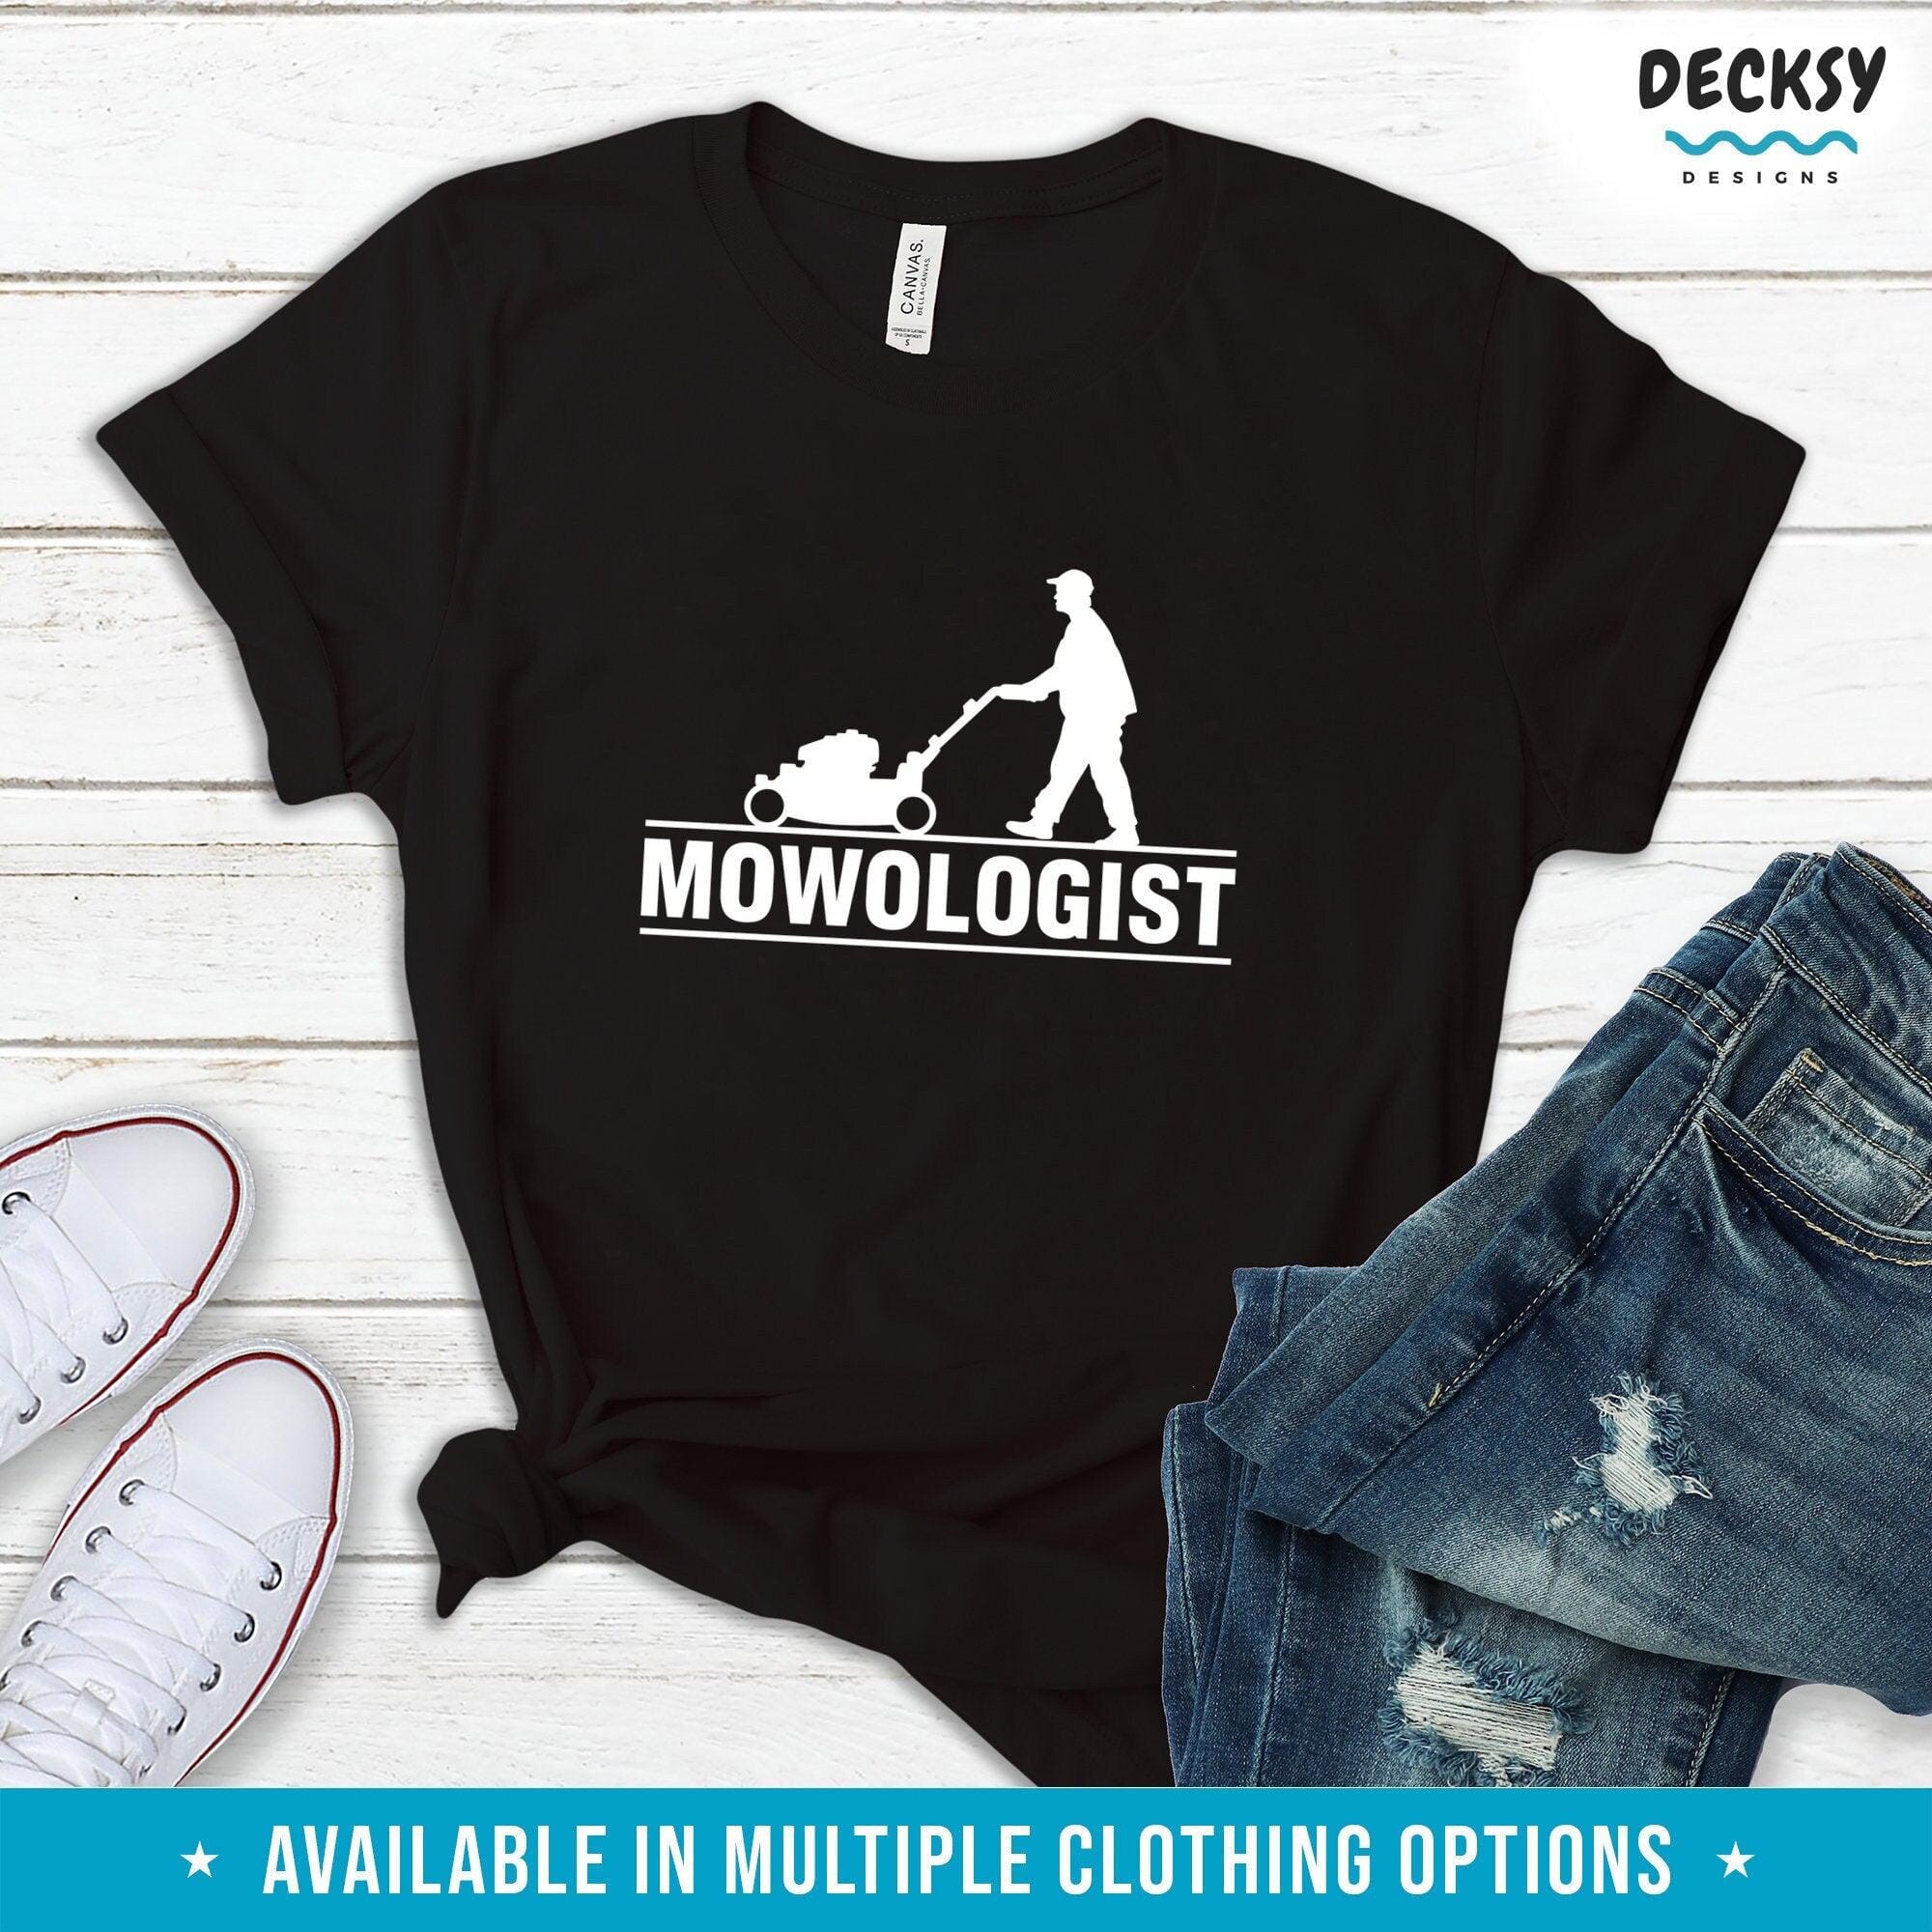 Mowing T-Shirt, Lawn Mower Gift-Clothing:Gender-Neutral Adult Clothing:Tops & Tees:T-shirts:Graphic Tees-DecksyDesigns